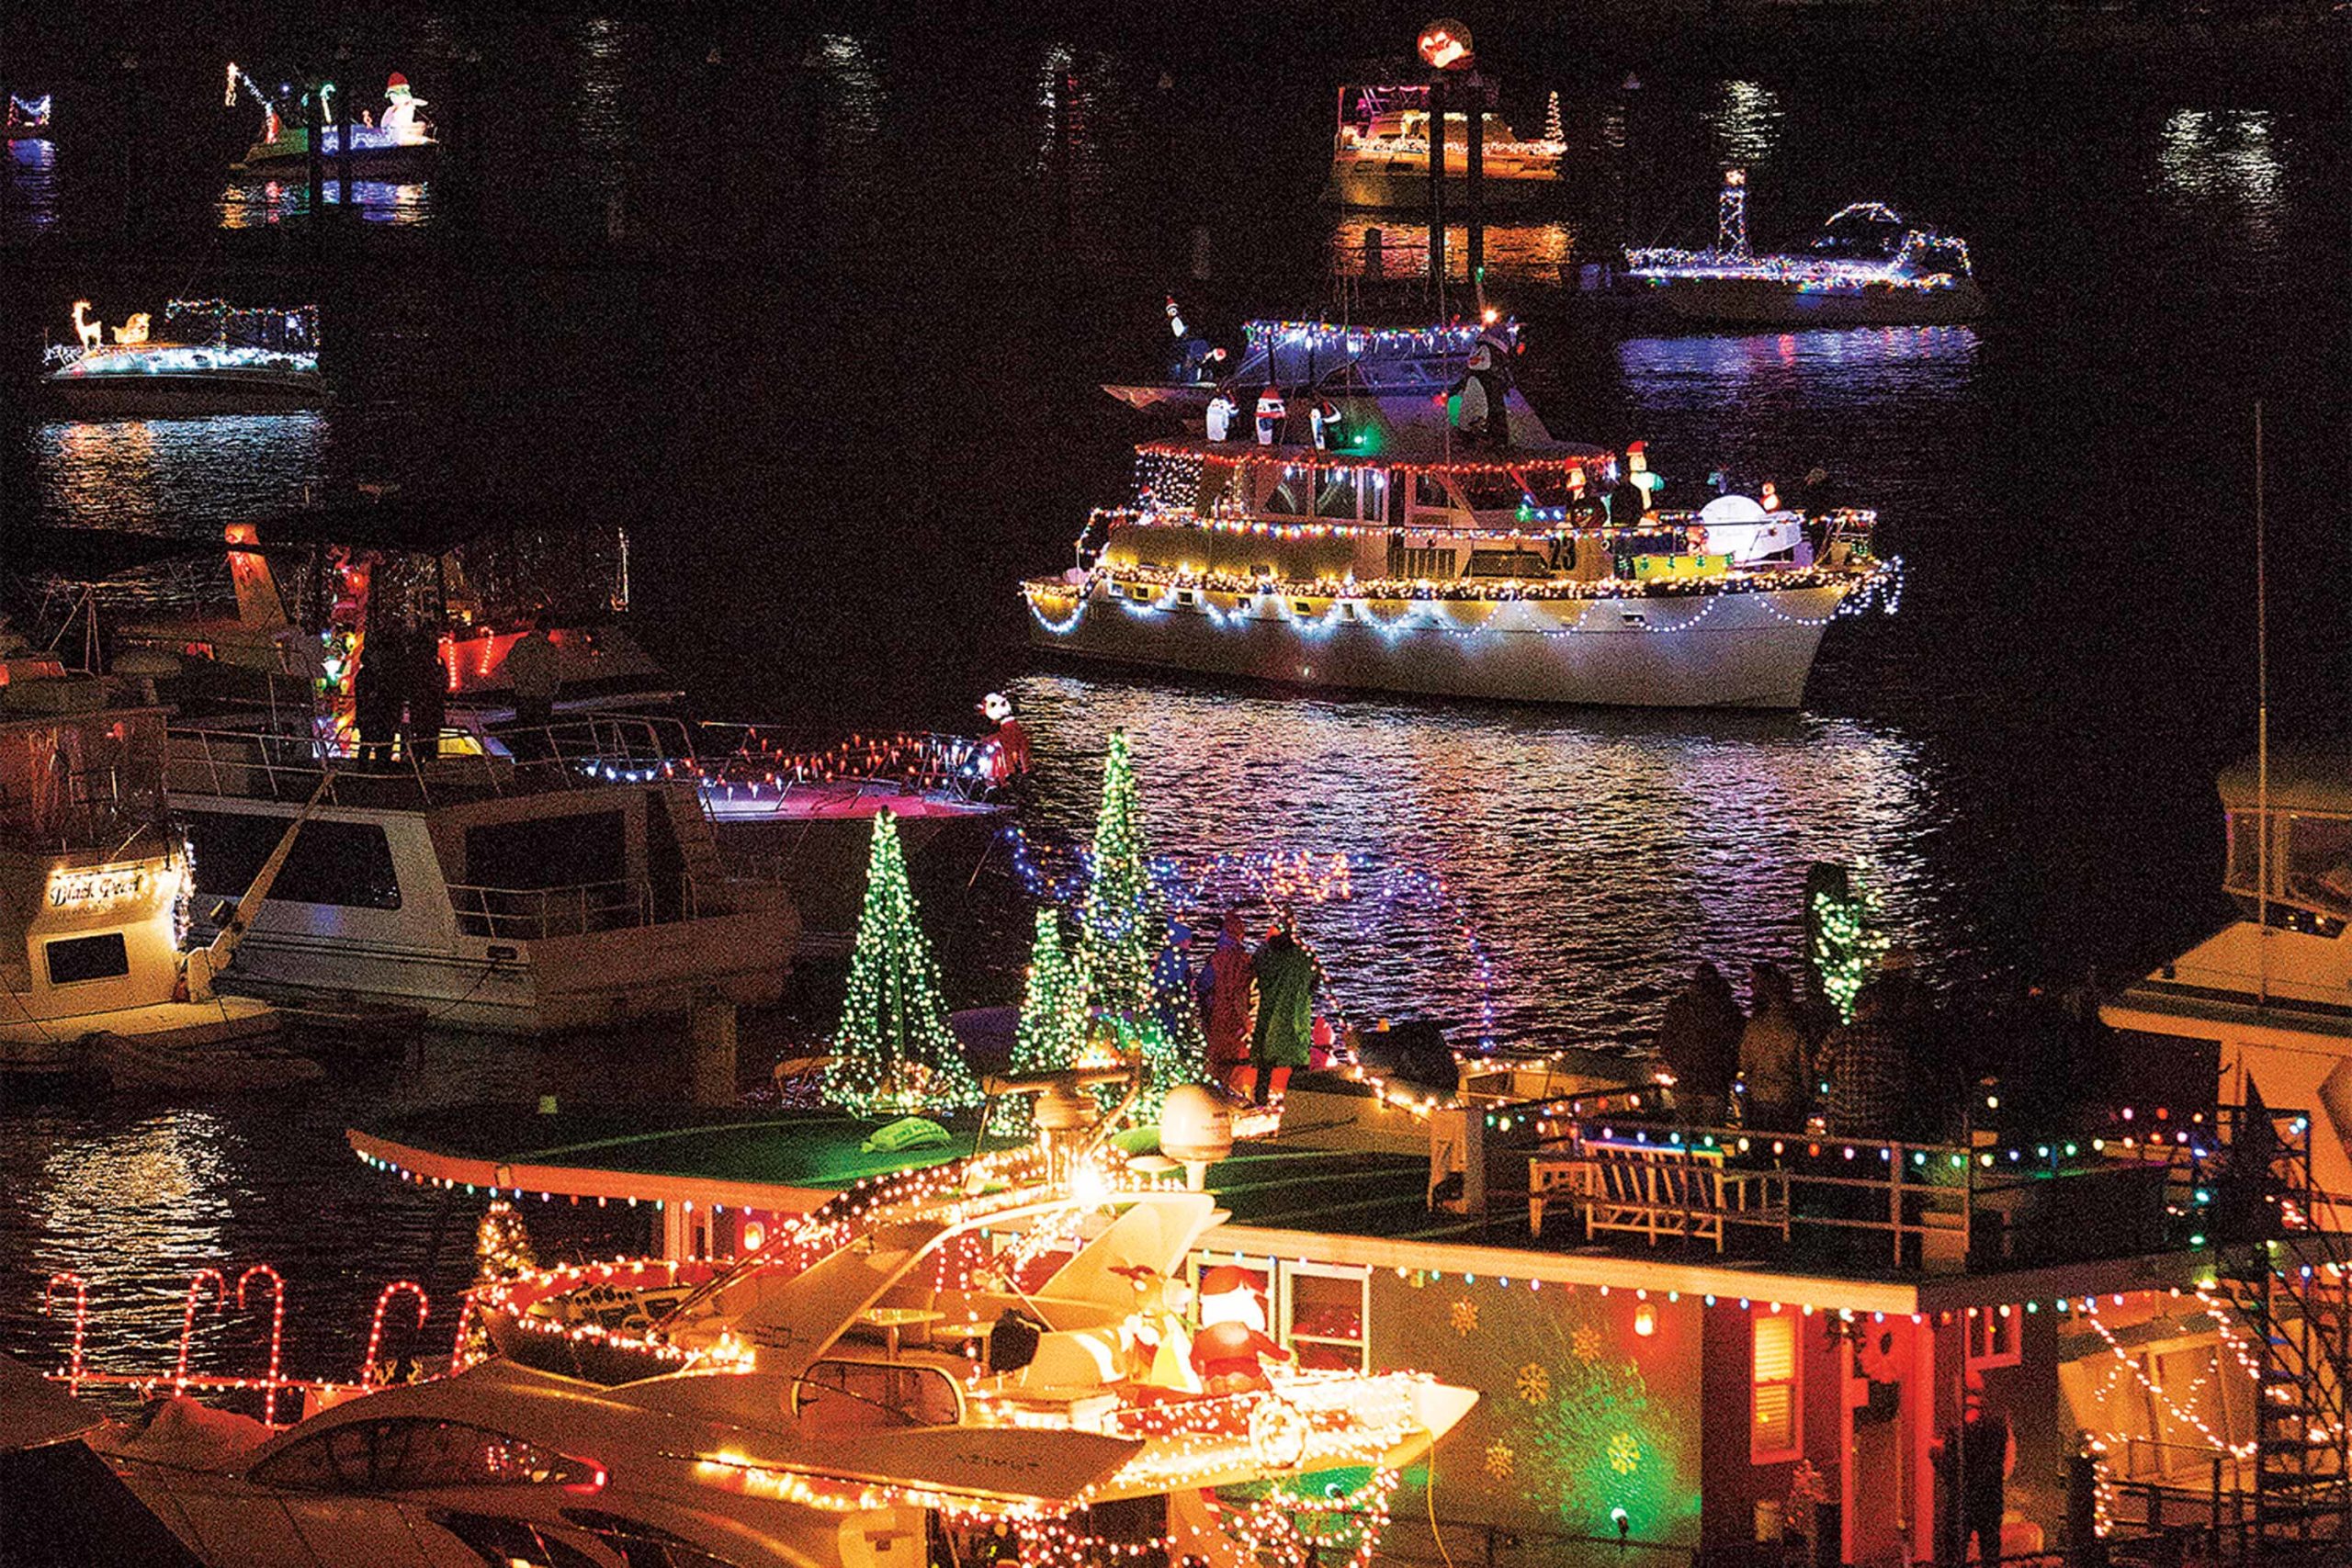 The District’s Holiday Boat Parade